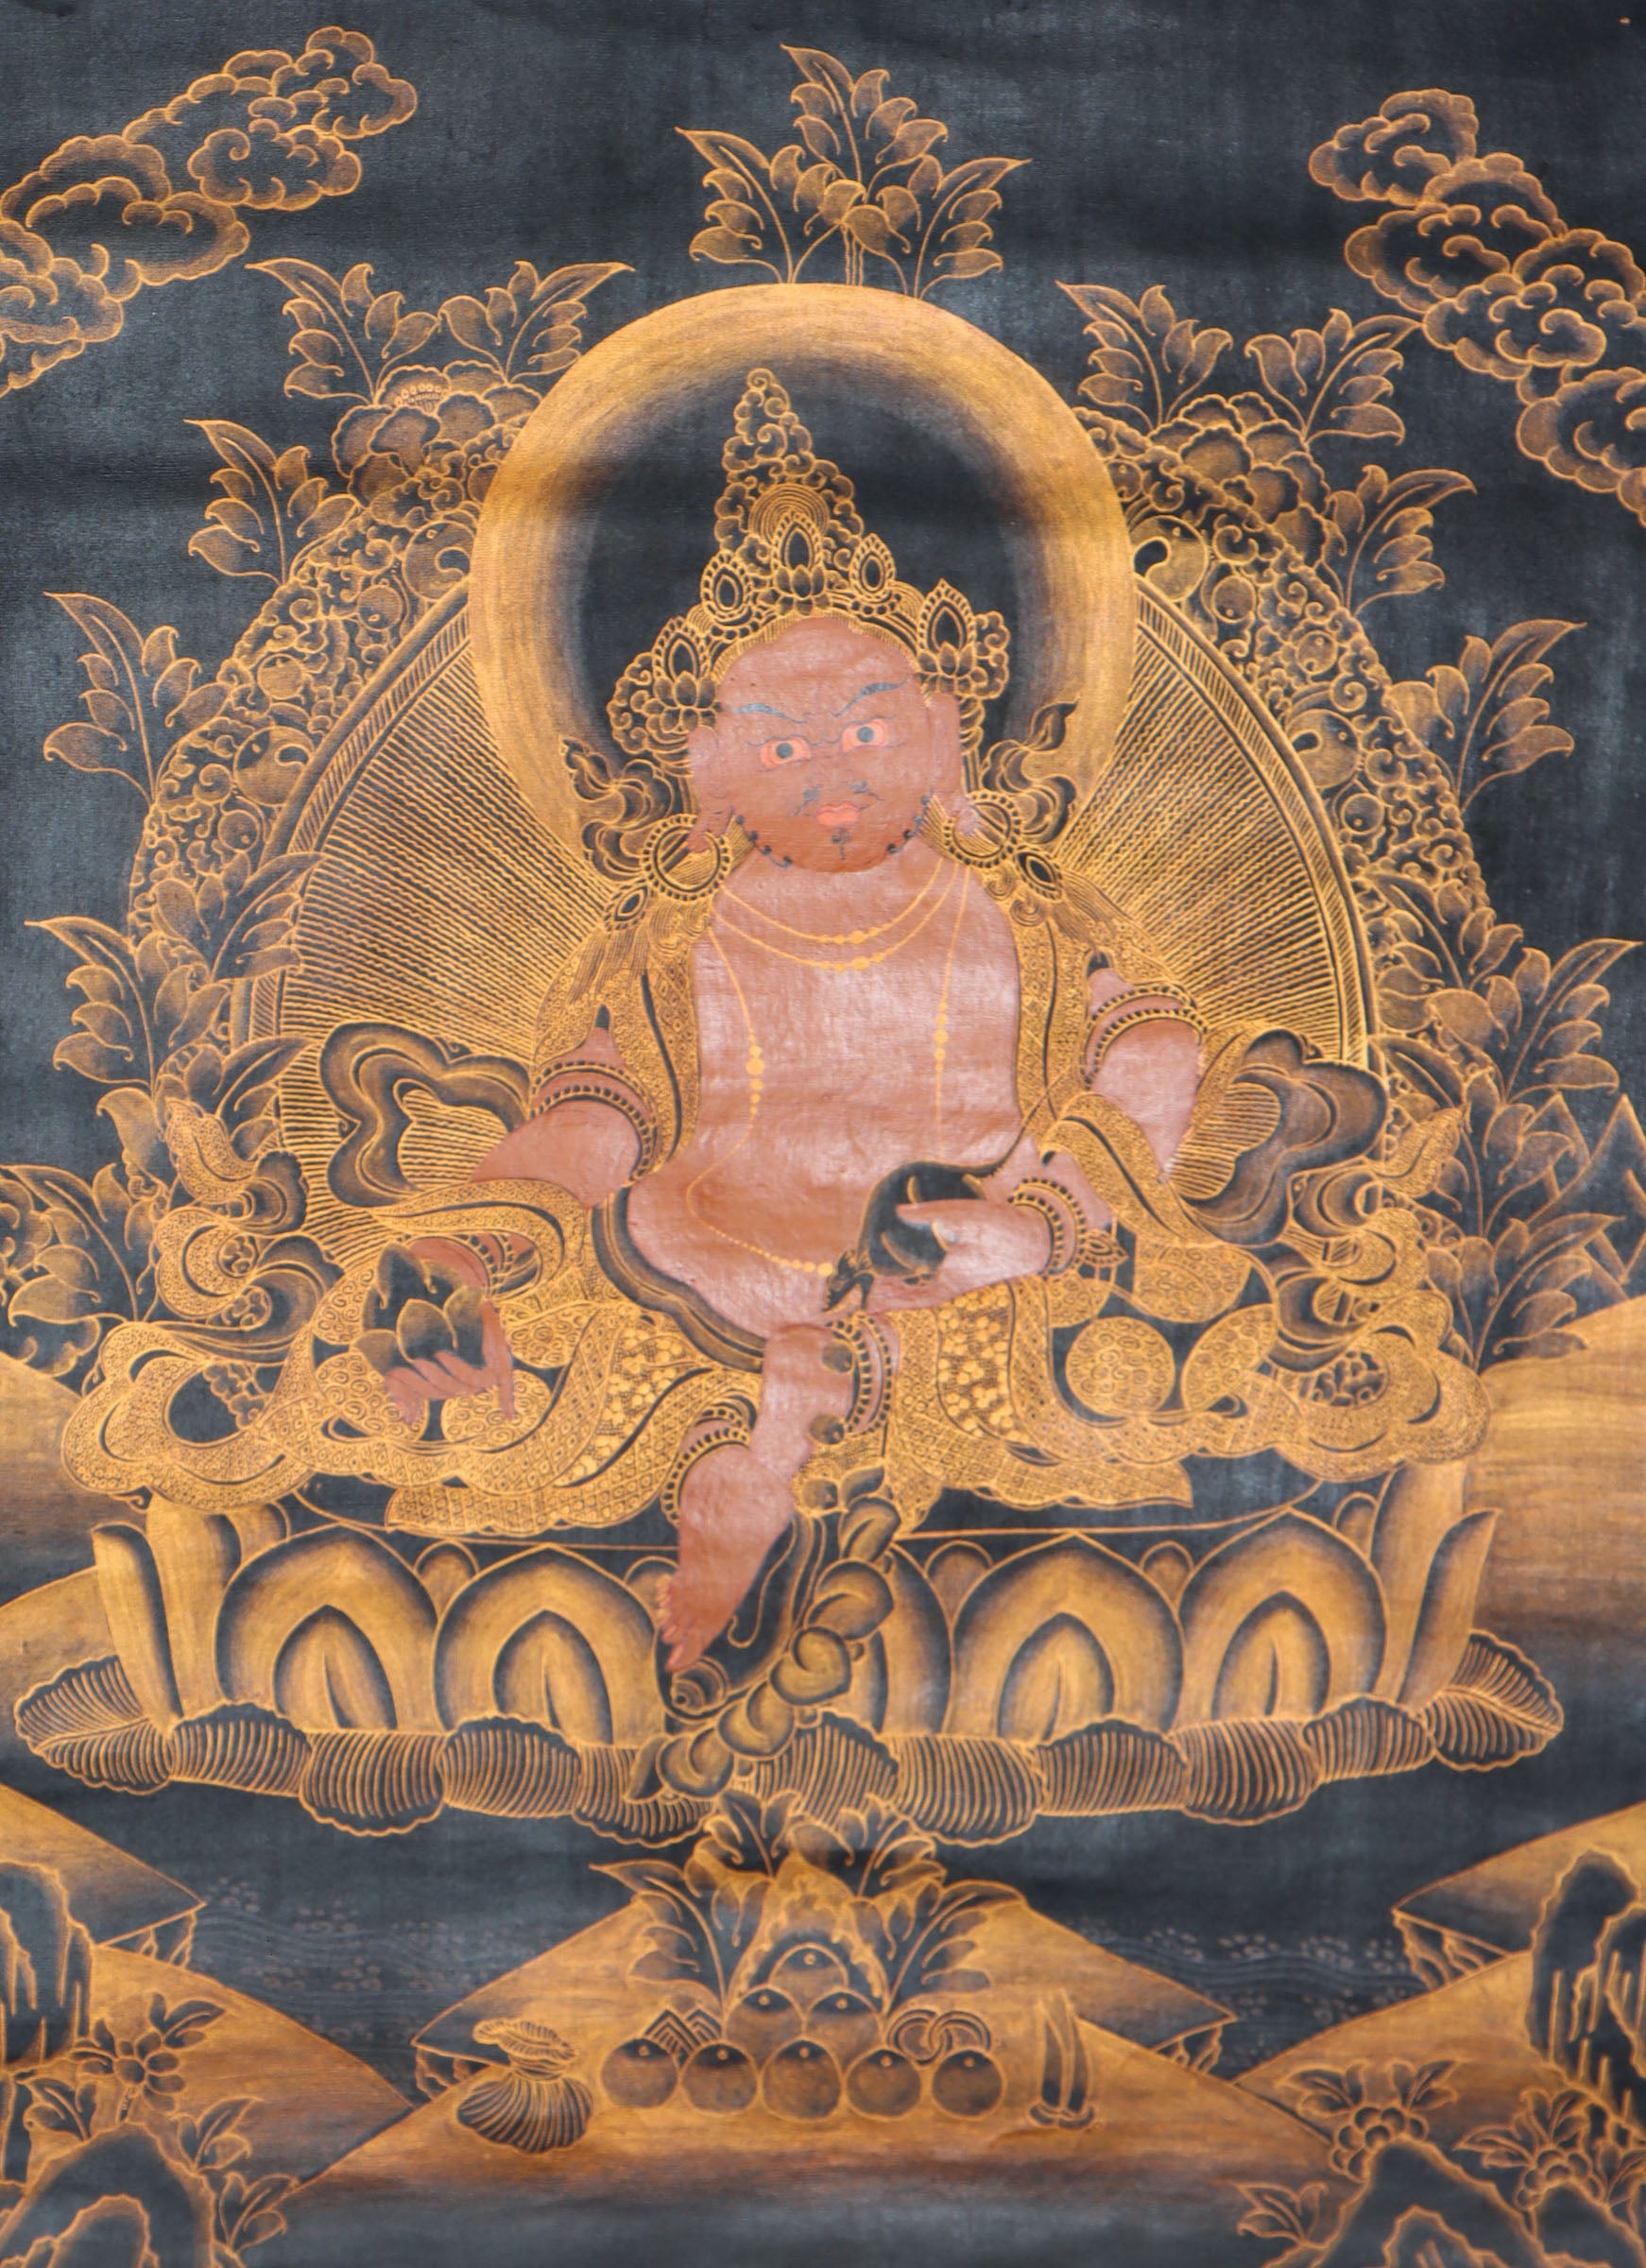  Antique Zambala Thangka Painting for wealth and prosperity.